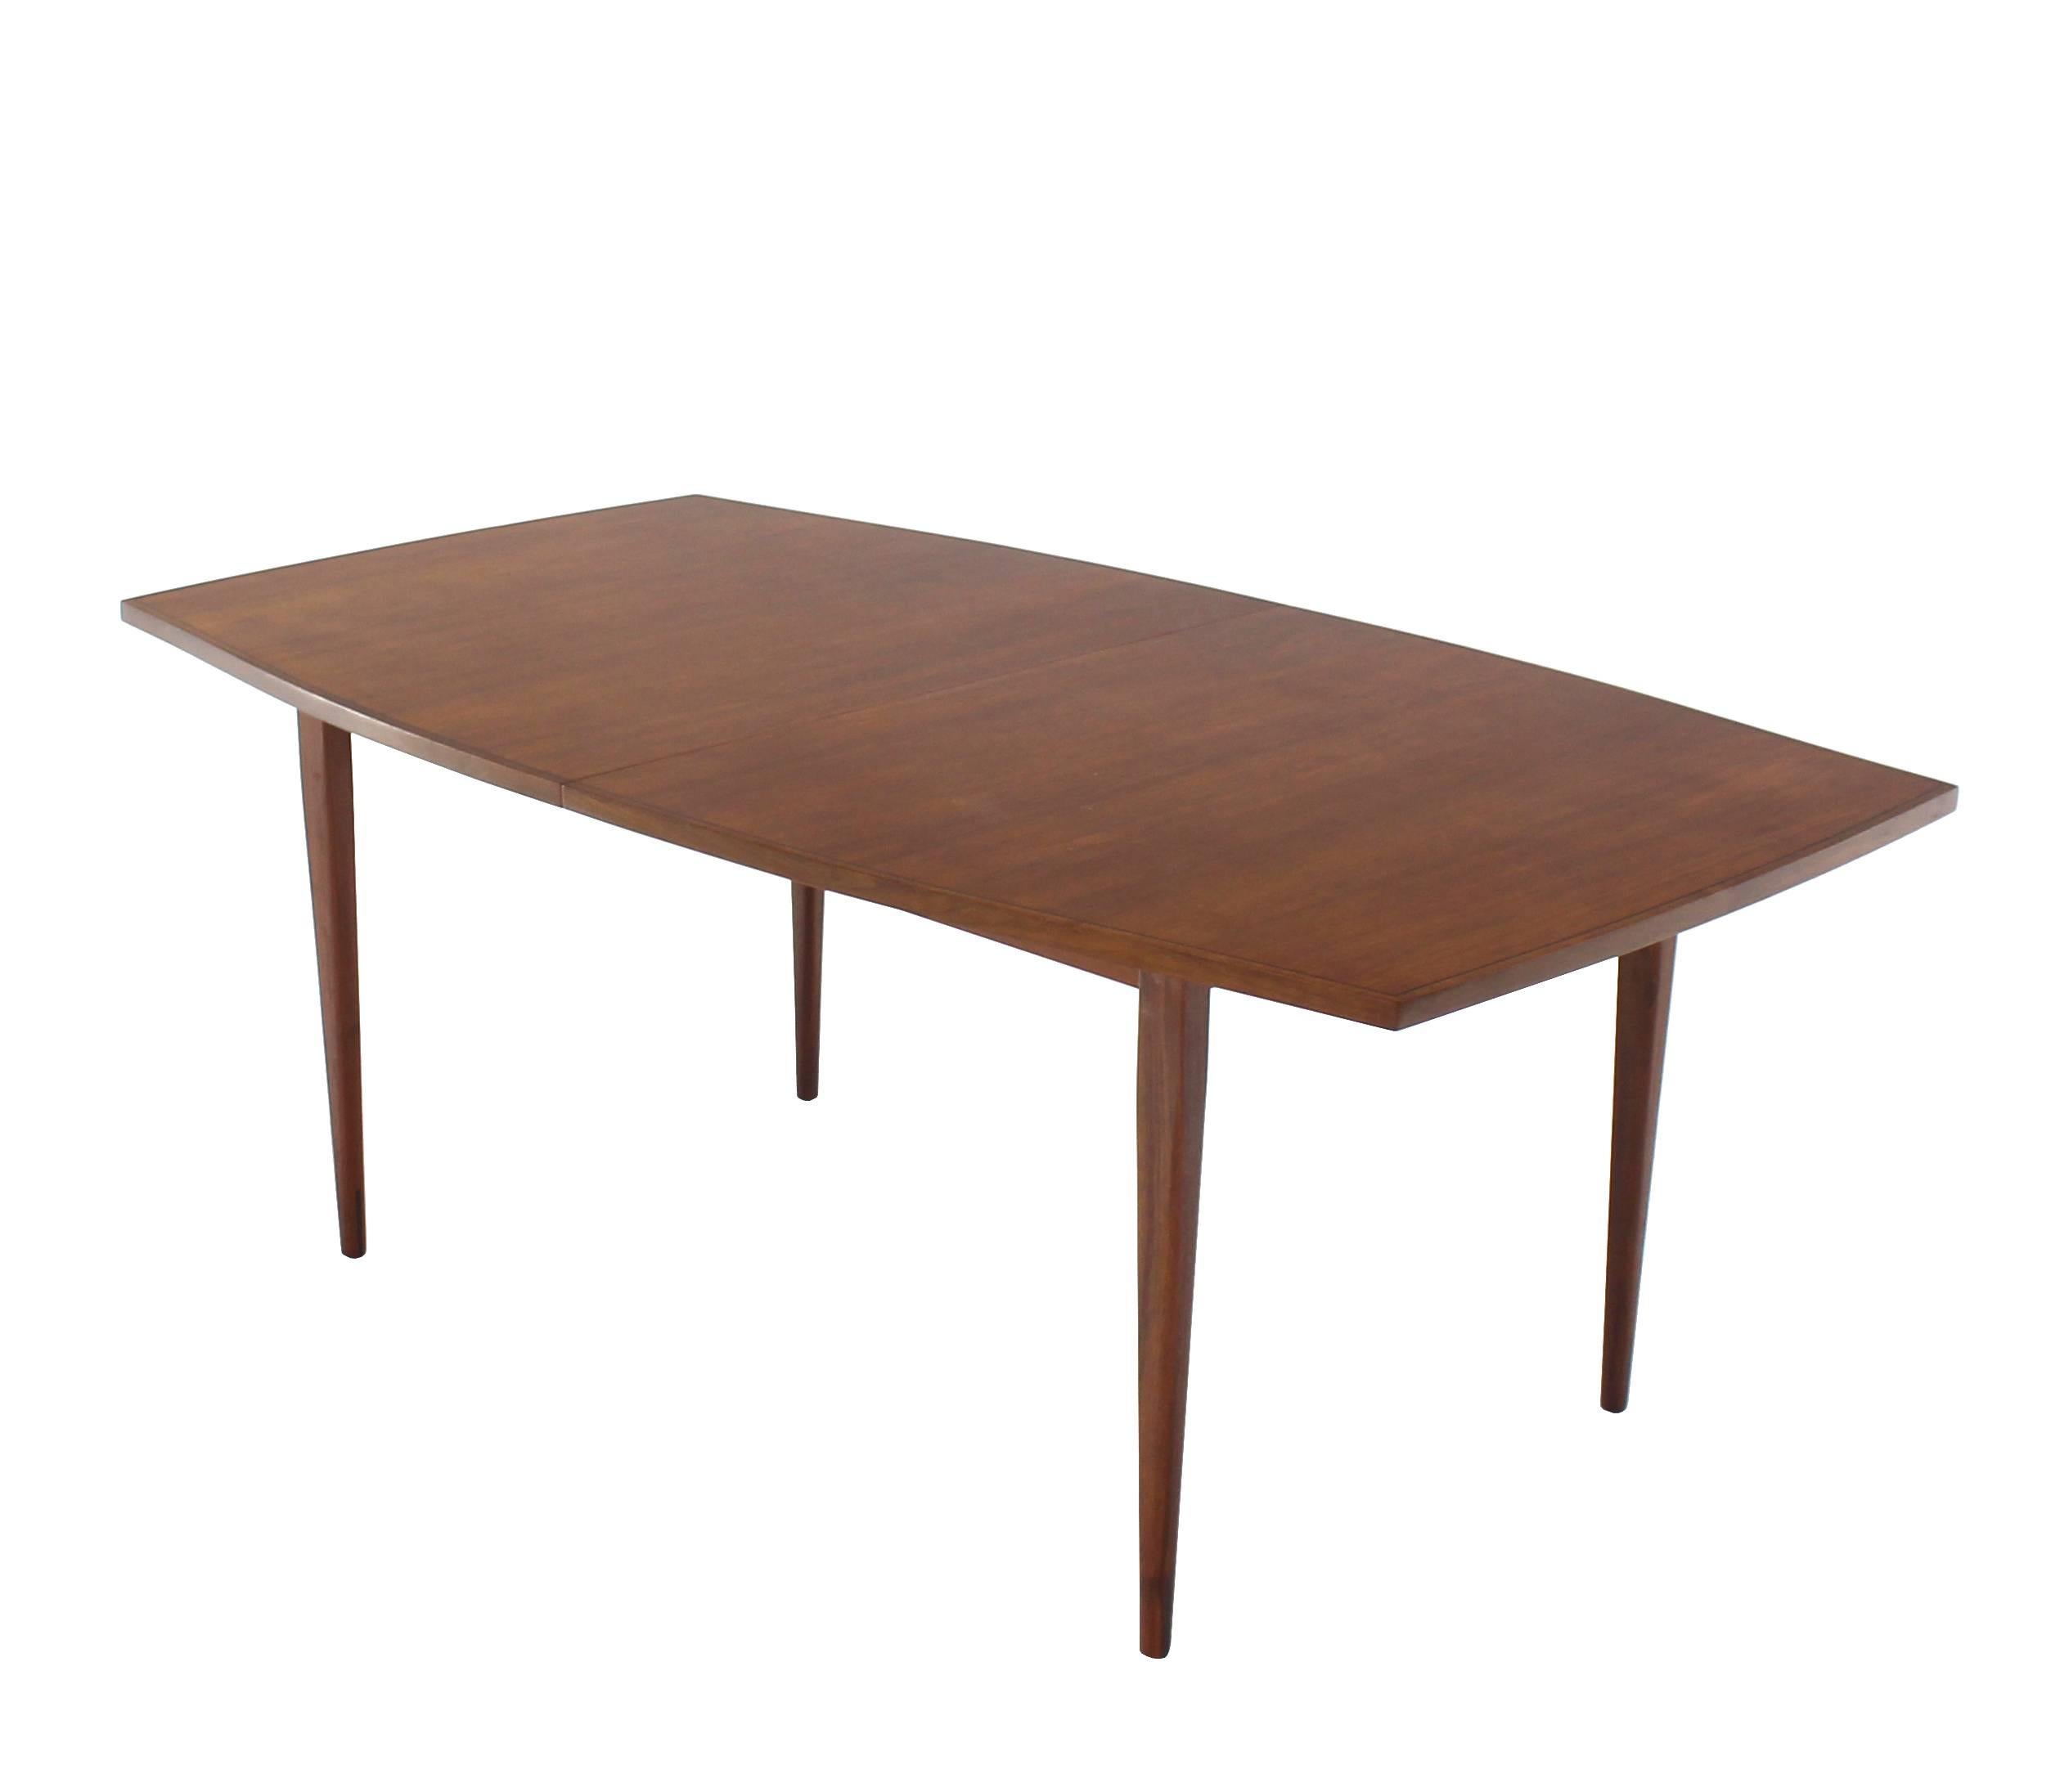 20th Century Large Walnut Dining Table by Directional